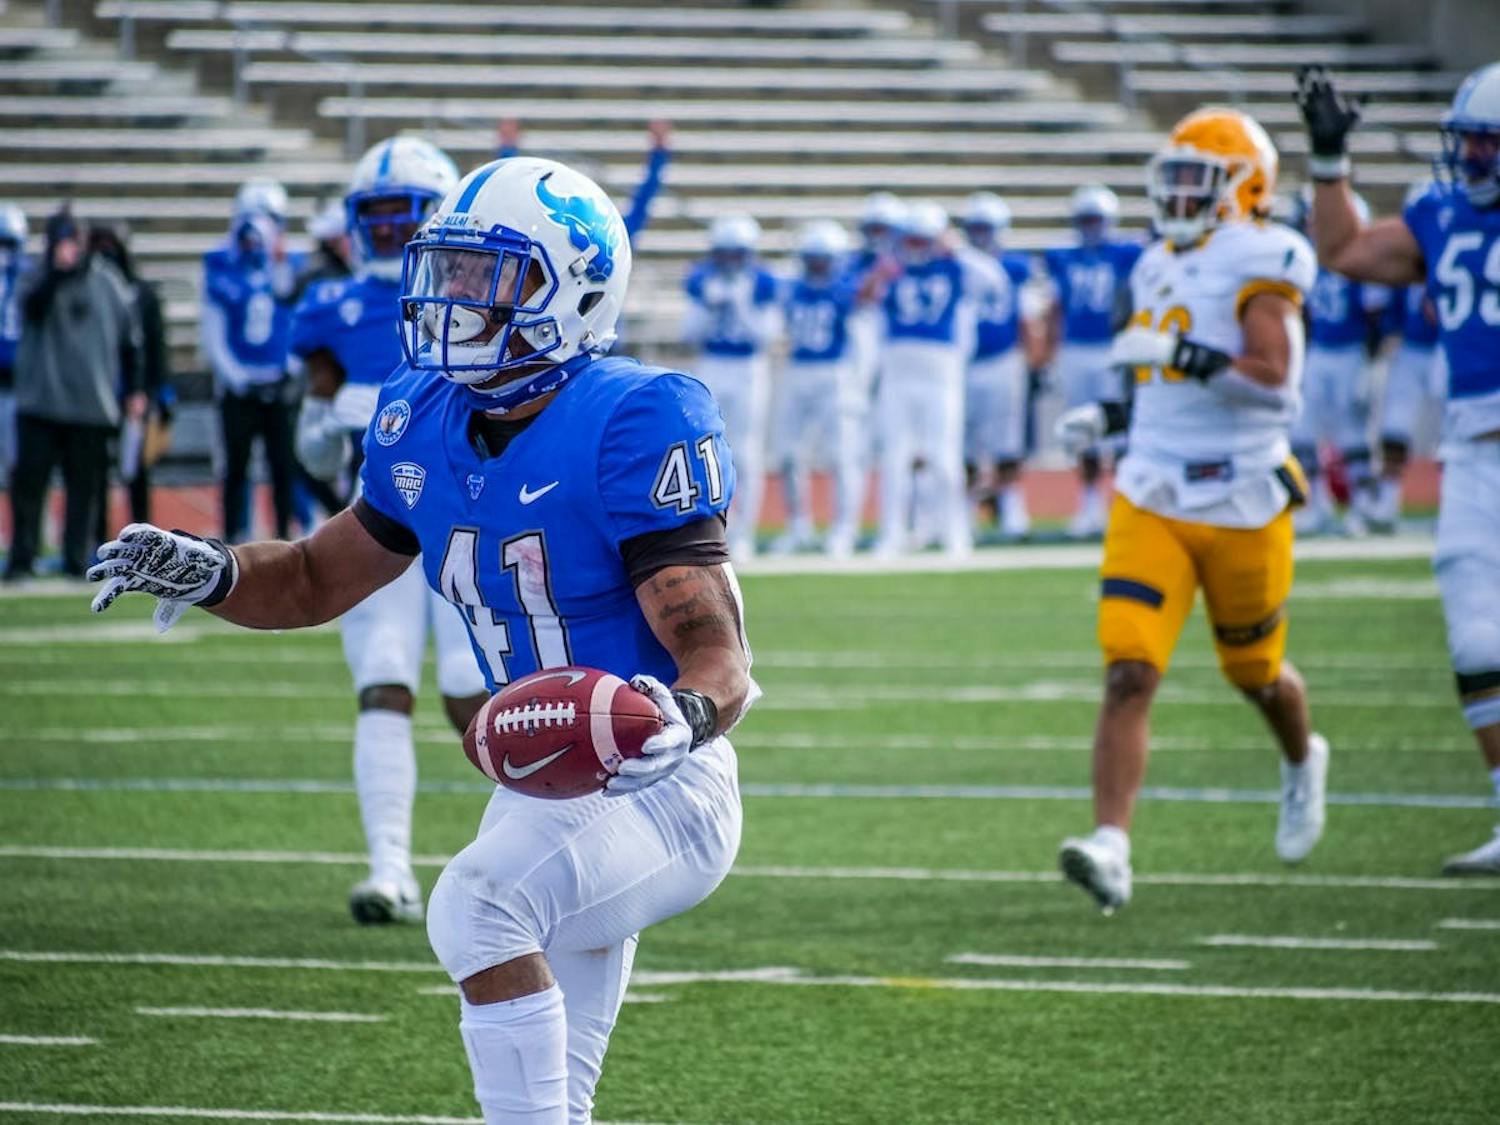 After entering the NFL as an undrafted free agent out of UB, Jaret Patterson will look to find a new NFL home.